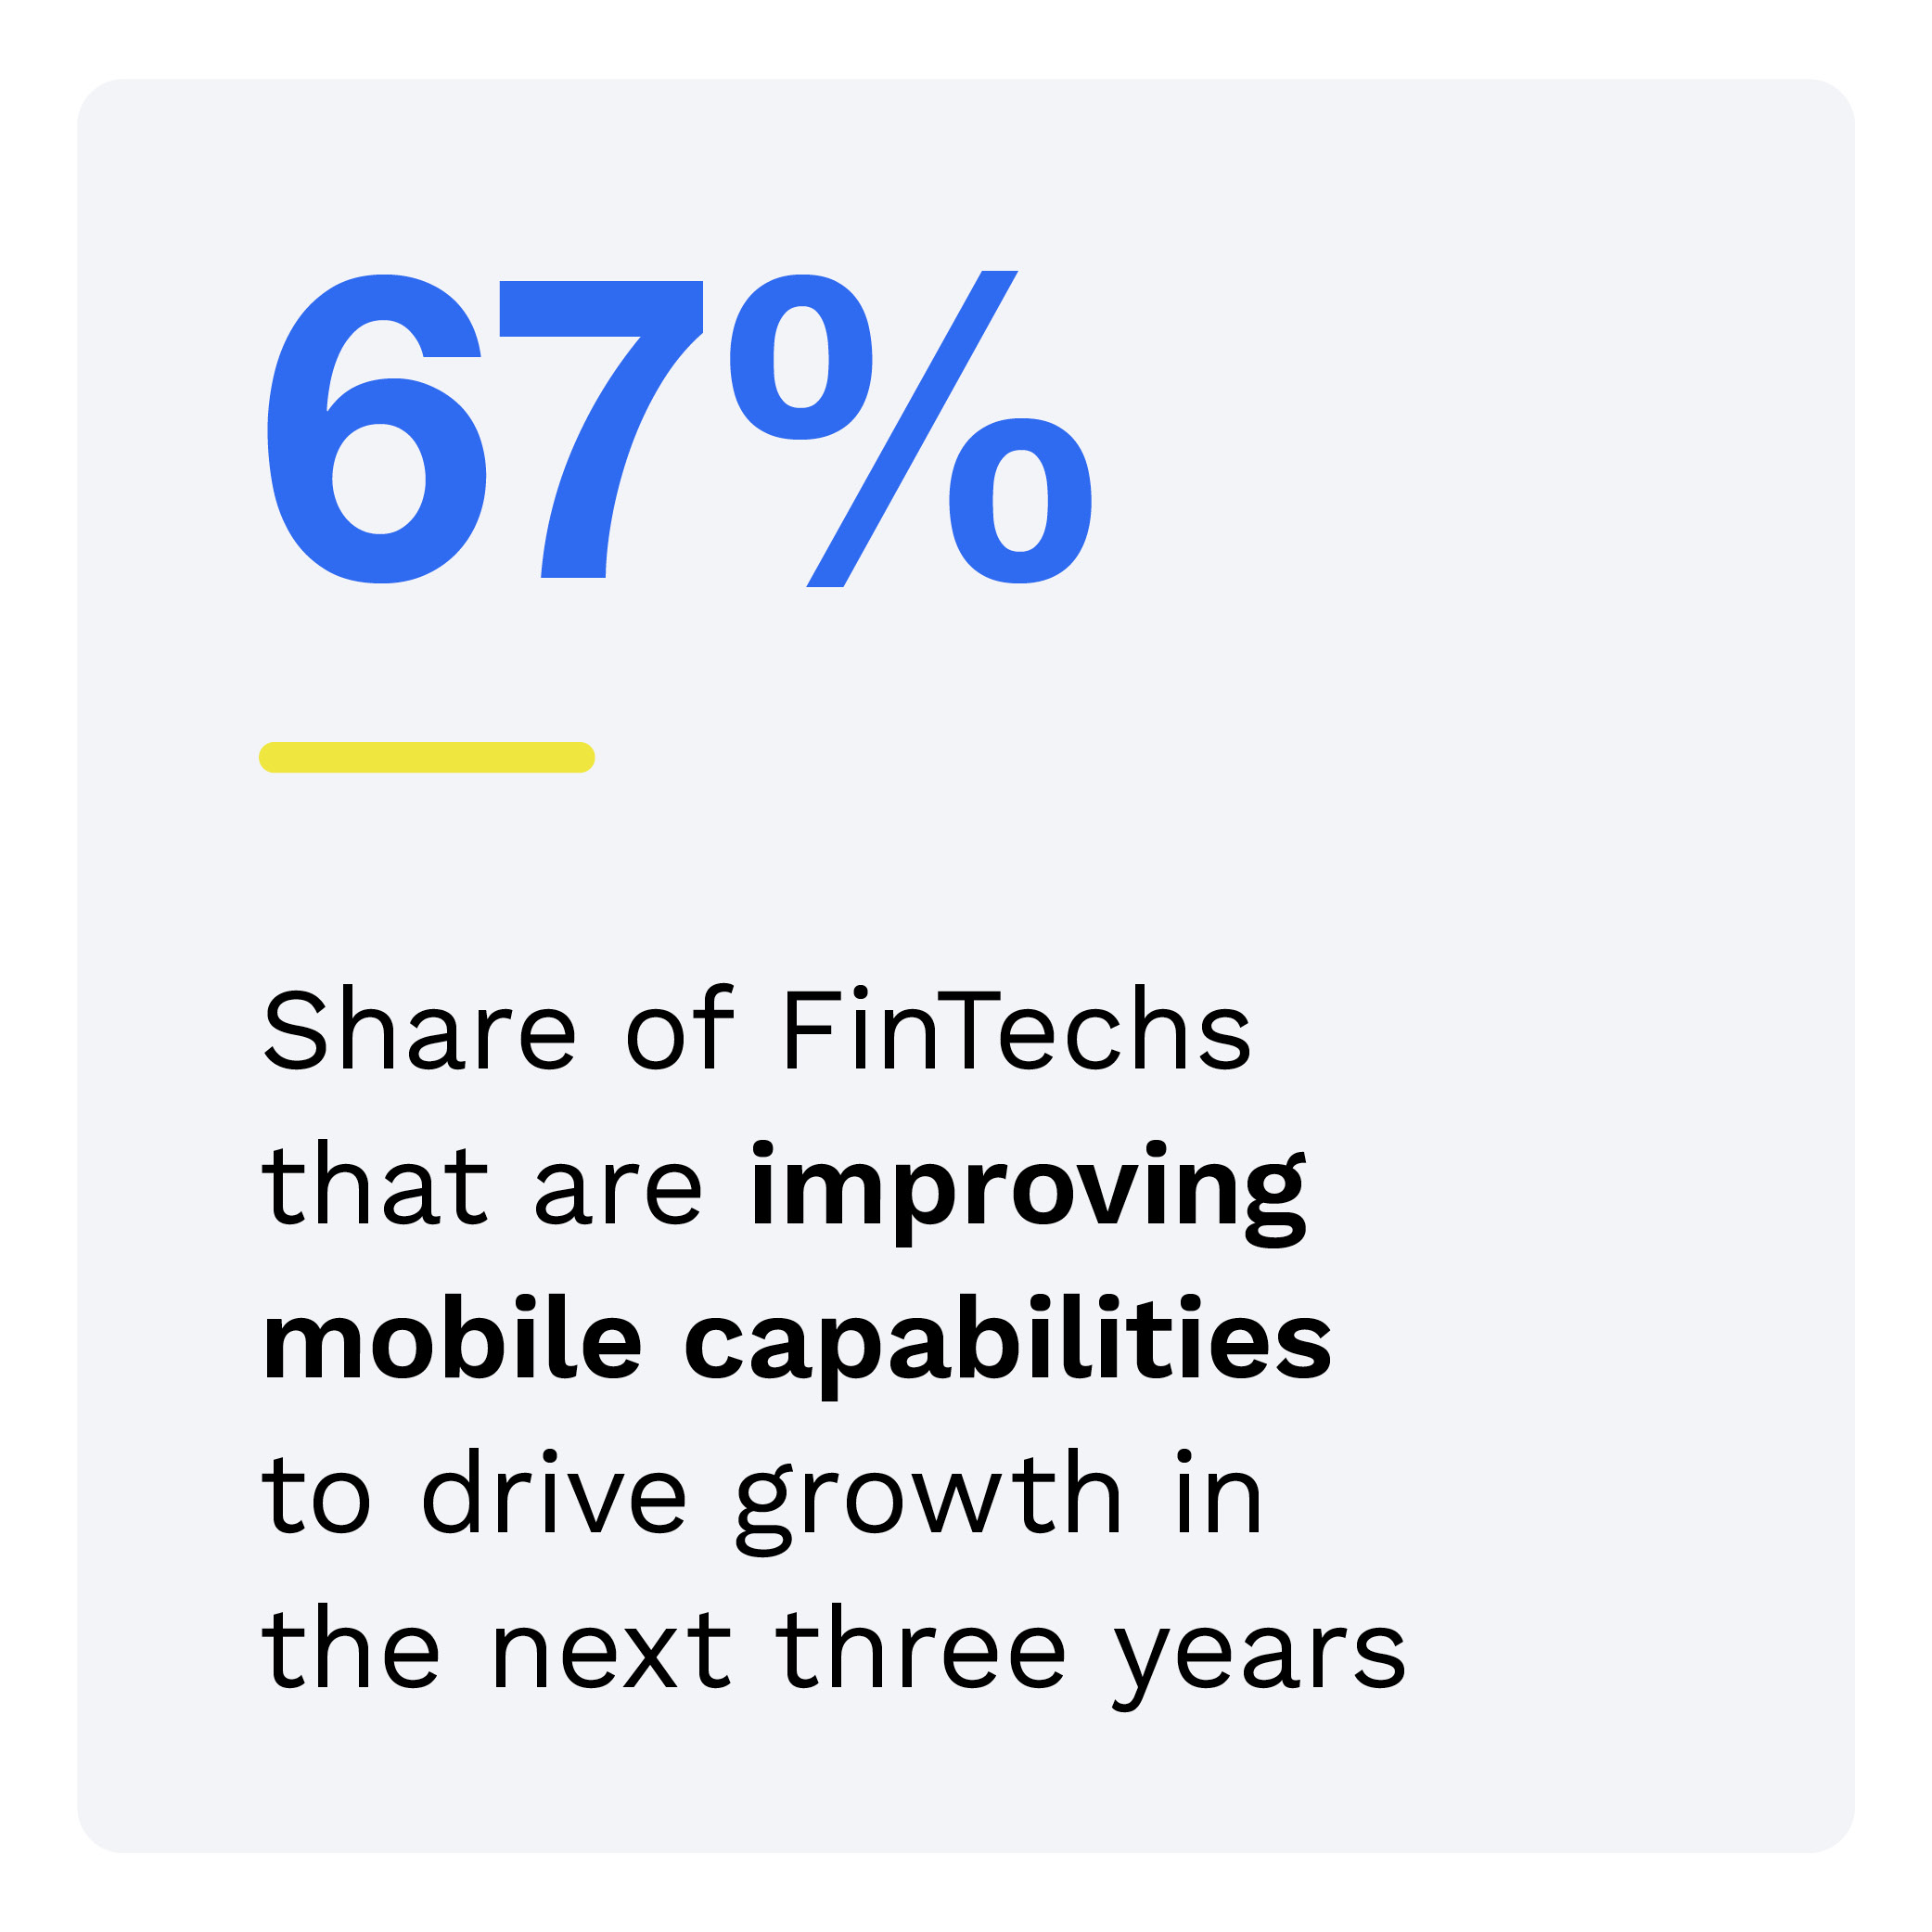 67%: Share of FinTechs that are improving mobile capabilities to drive growth in the next three years